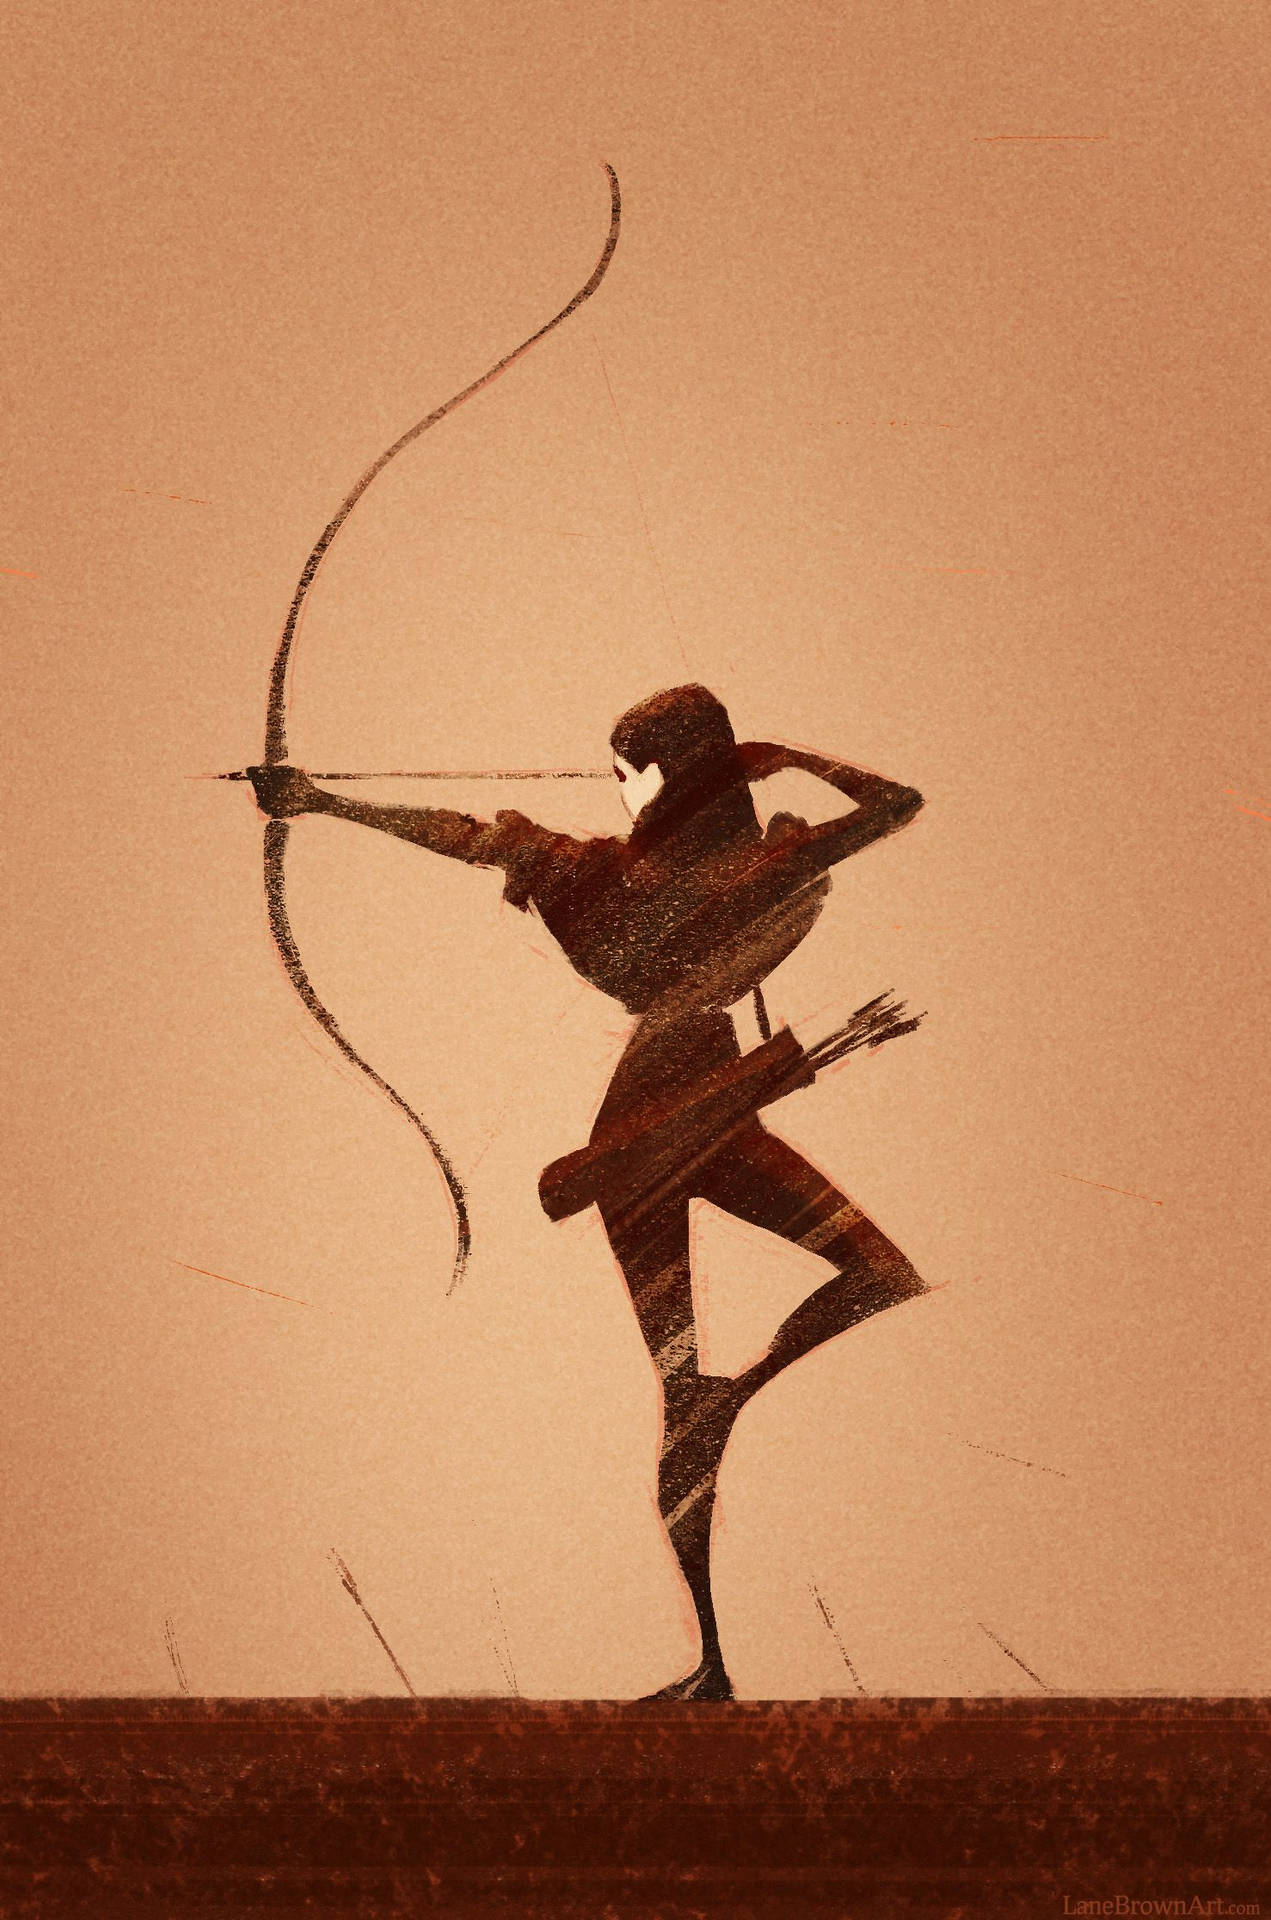 Woman Practicing Archery In Artistic Setting Background